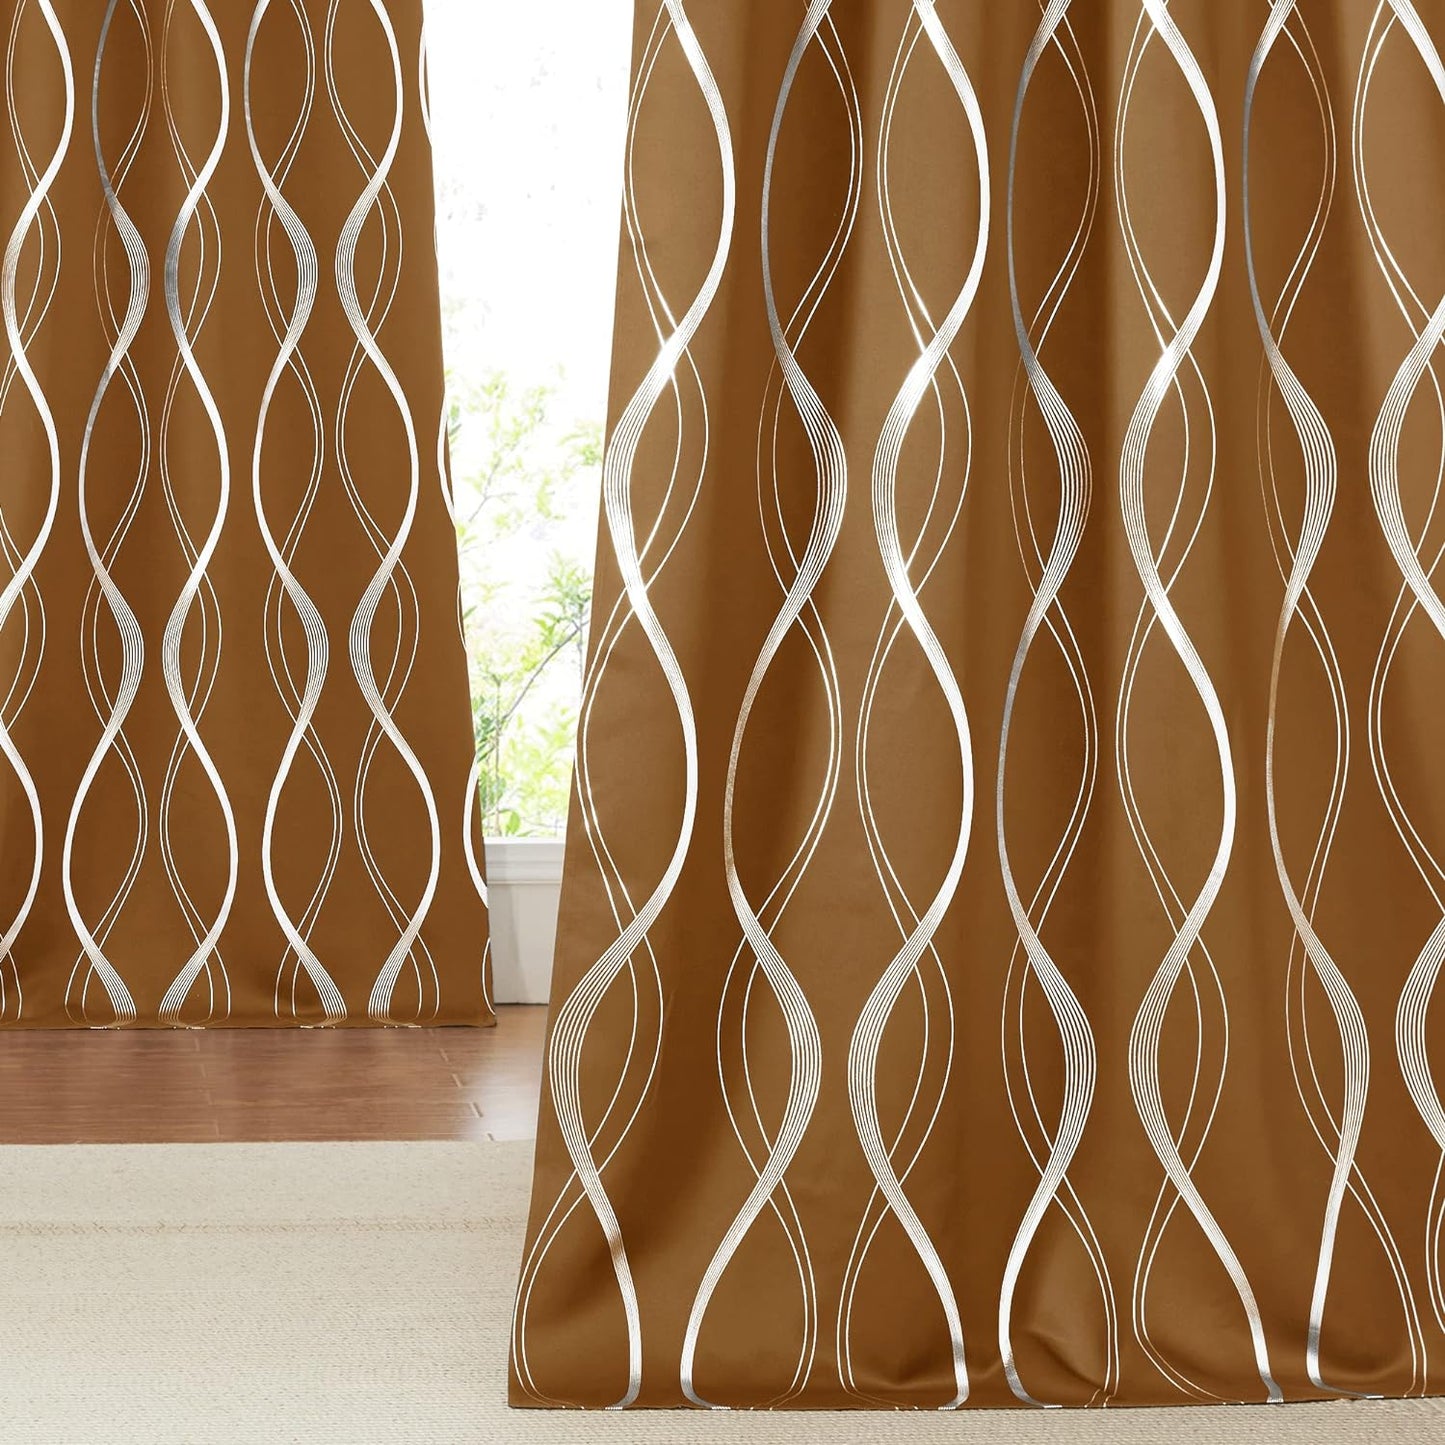 NICETOWN Grey Blackout Curtains 84 Inch Length 2 Panels Set for Bedroom/Living Room, Noise Reducing Thermal Insulated Wave Line Foil Print Drapes for Patio Sliding Glass Door (52 X 84, Gray)  NICETOWN Gold Brown 52"W X 84"L 